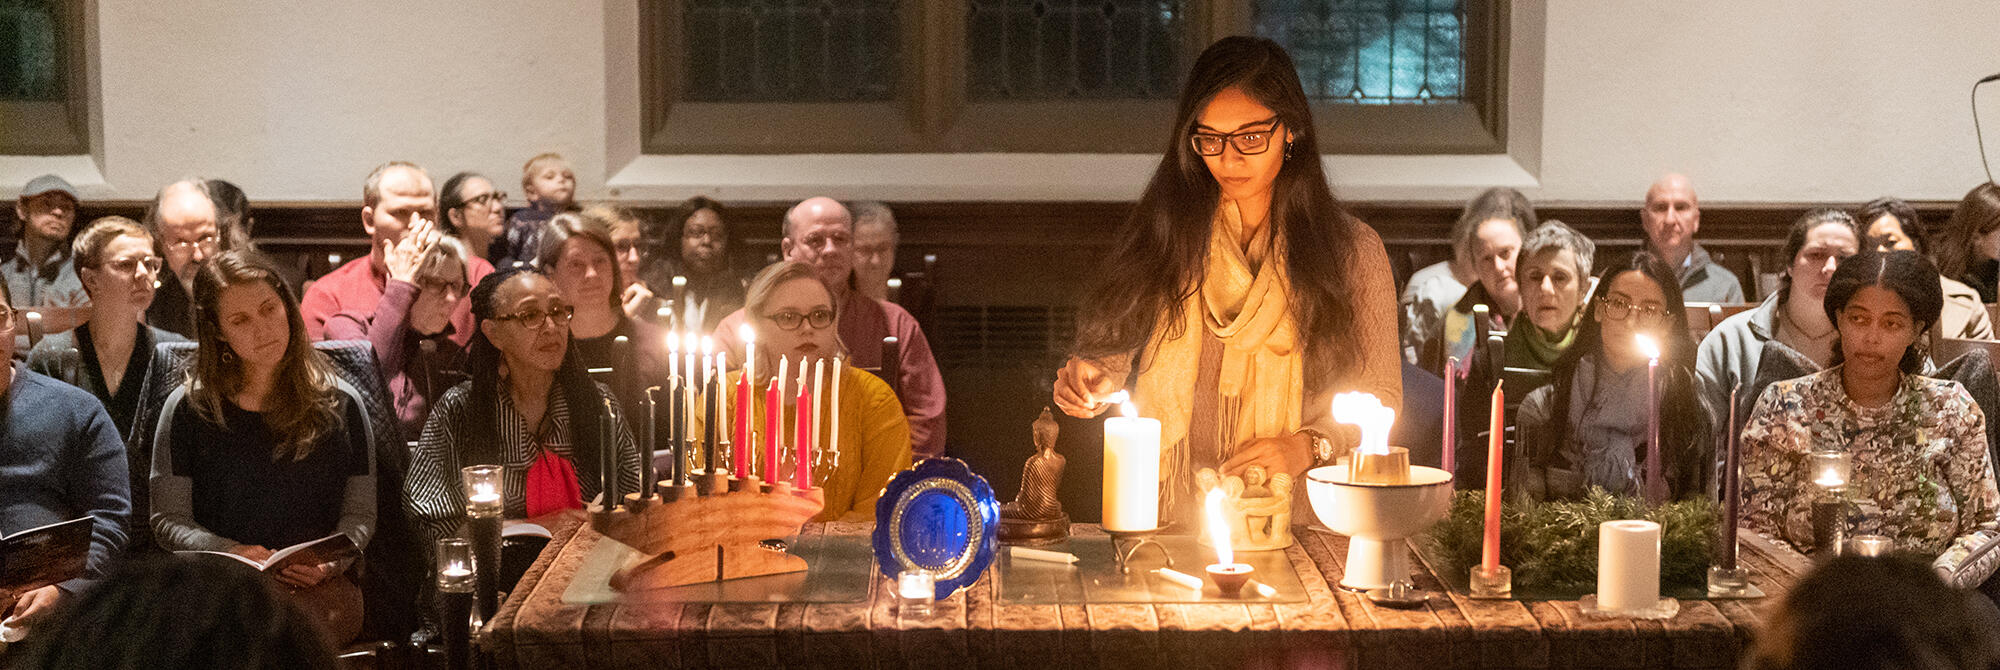 HDs student lighting a candle during the 2019 Seasons of Light service